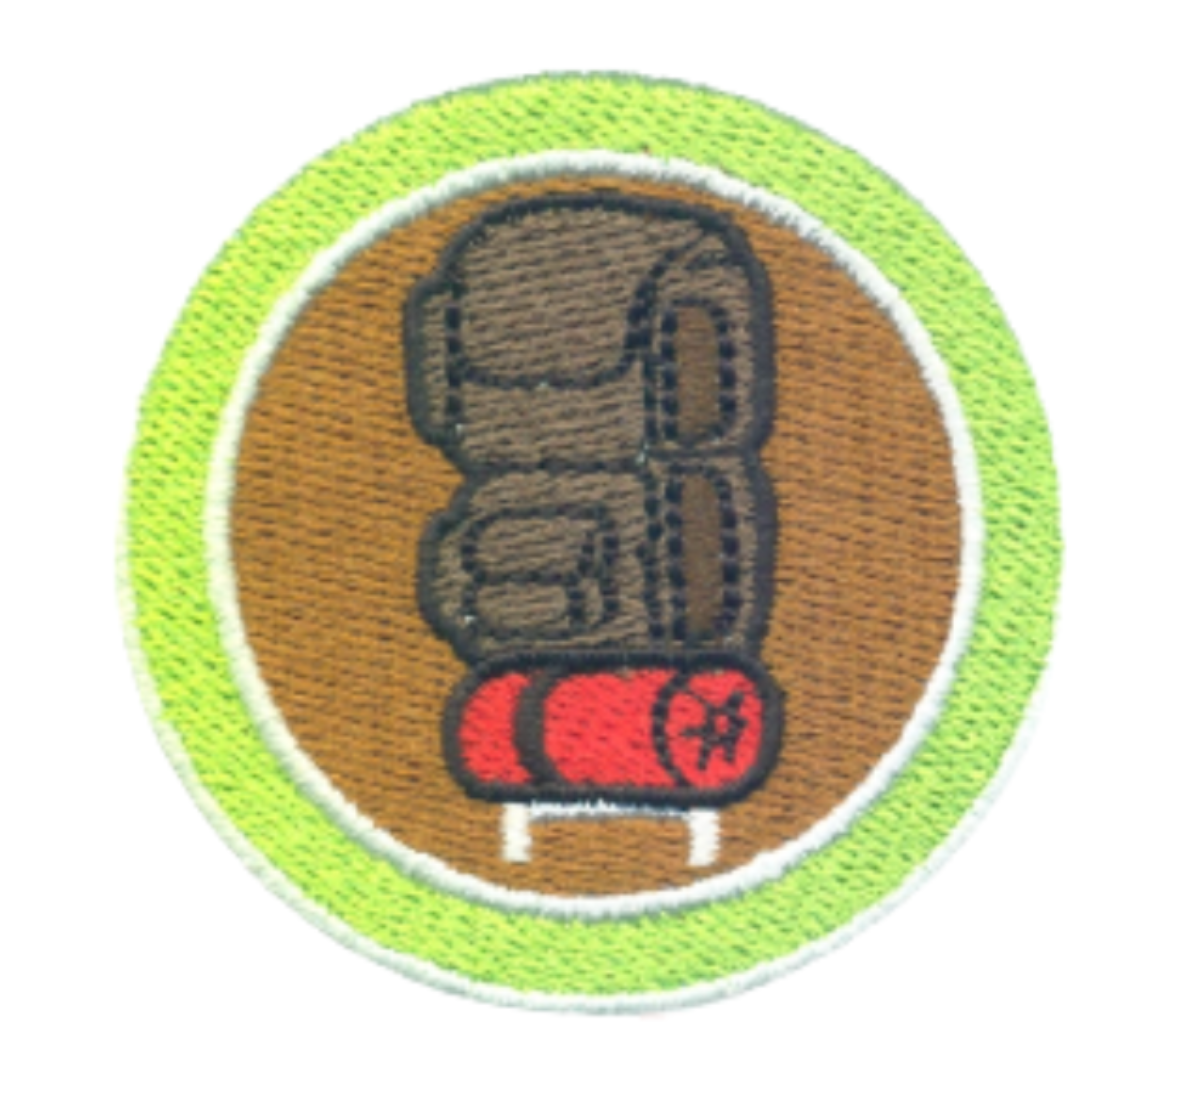 Boy Scouts of America Backpacking 2.25" x 2.25" Patch